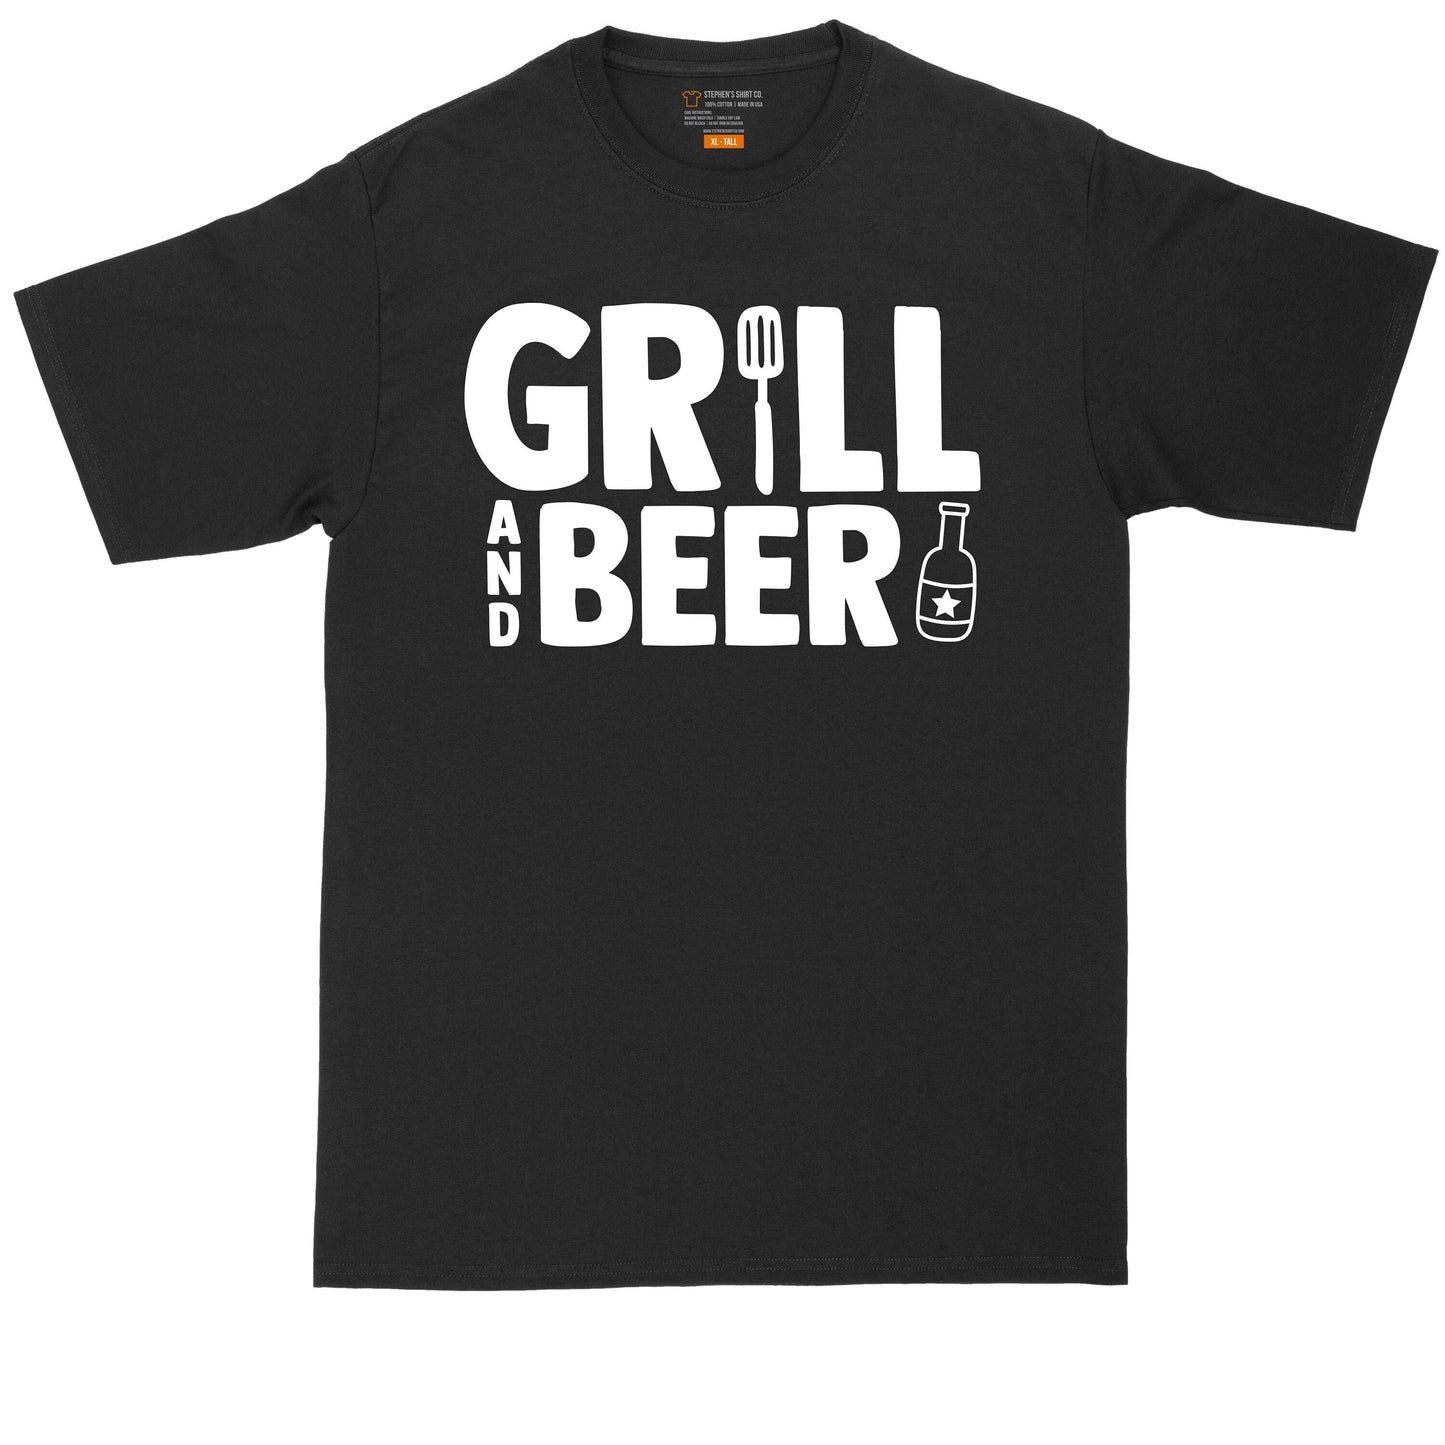 Grill and Beer | Grilling and Smoking Shirt | Mens Big and Tall T-Shirt